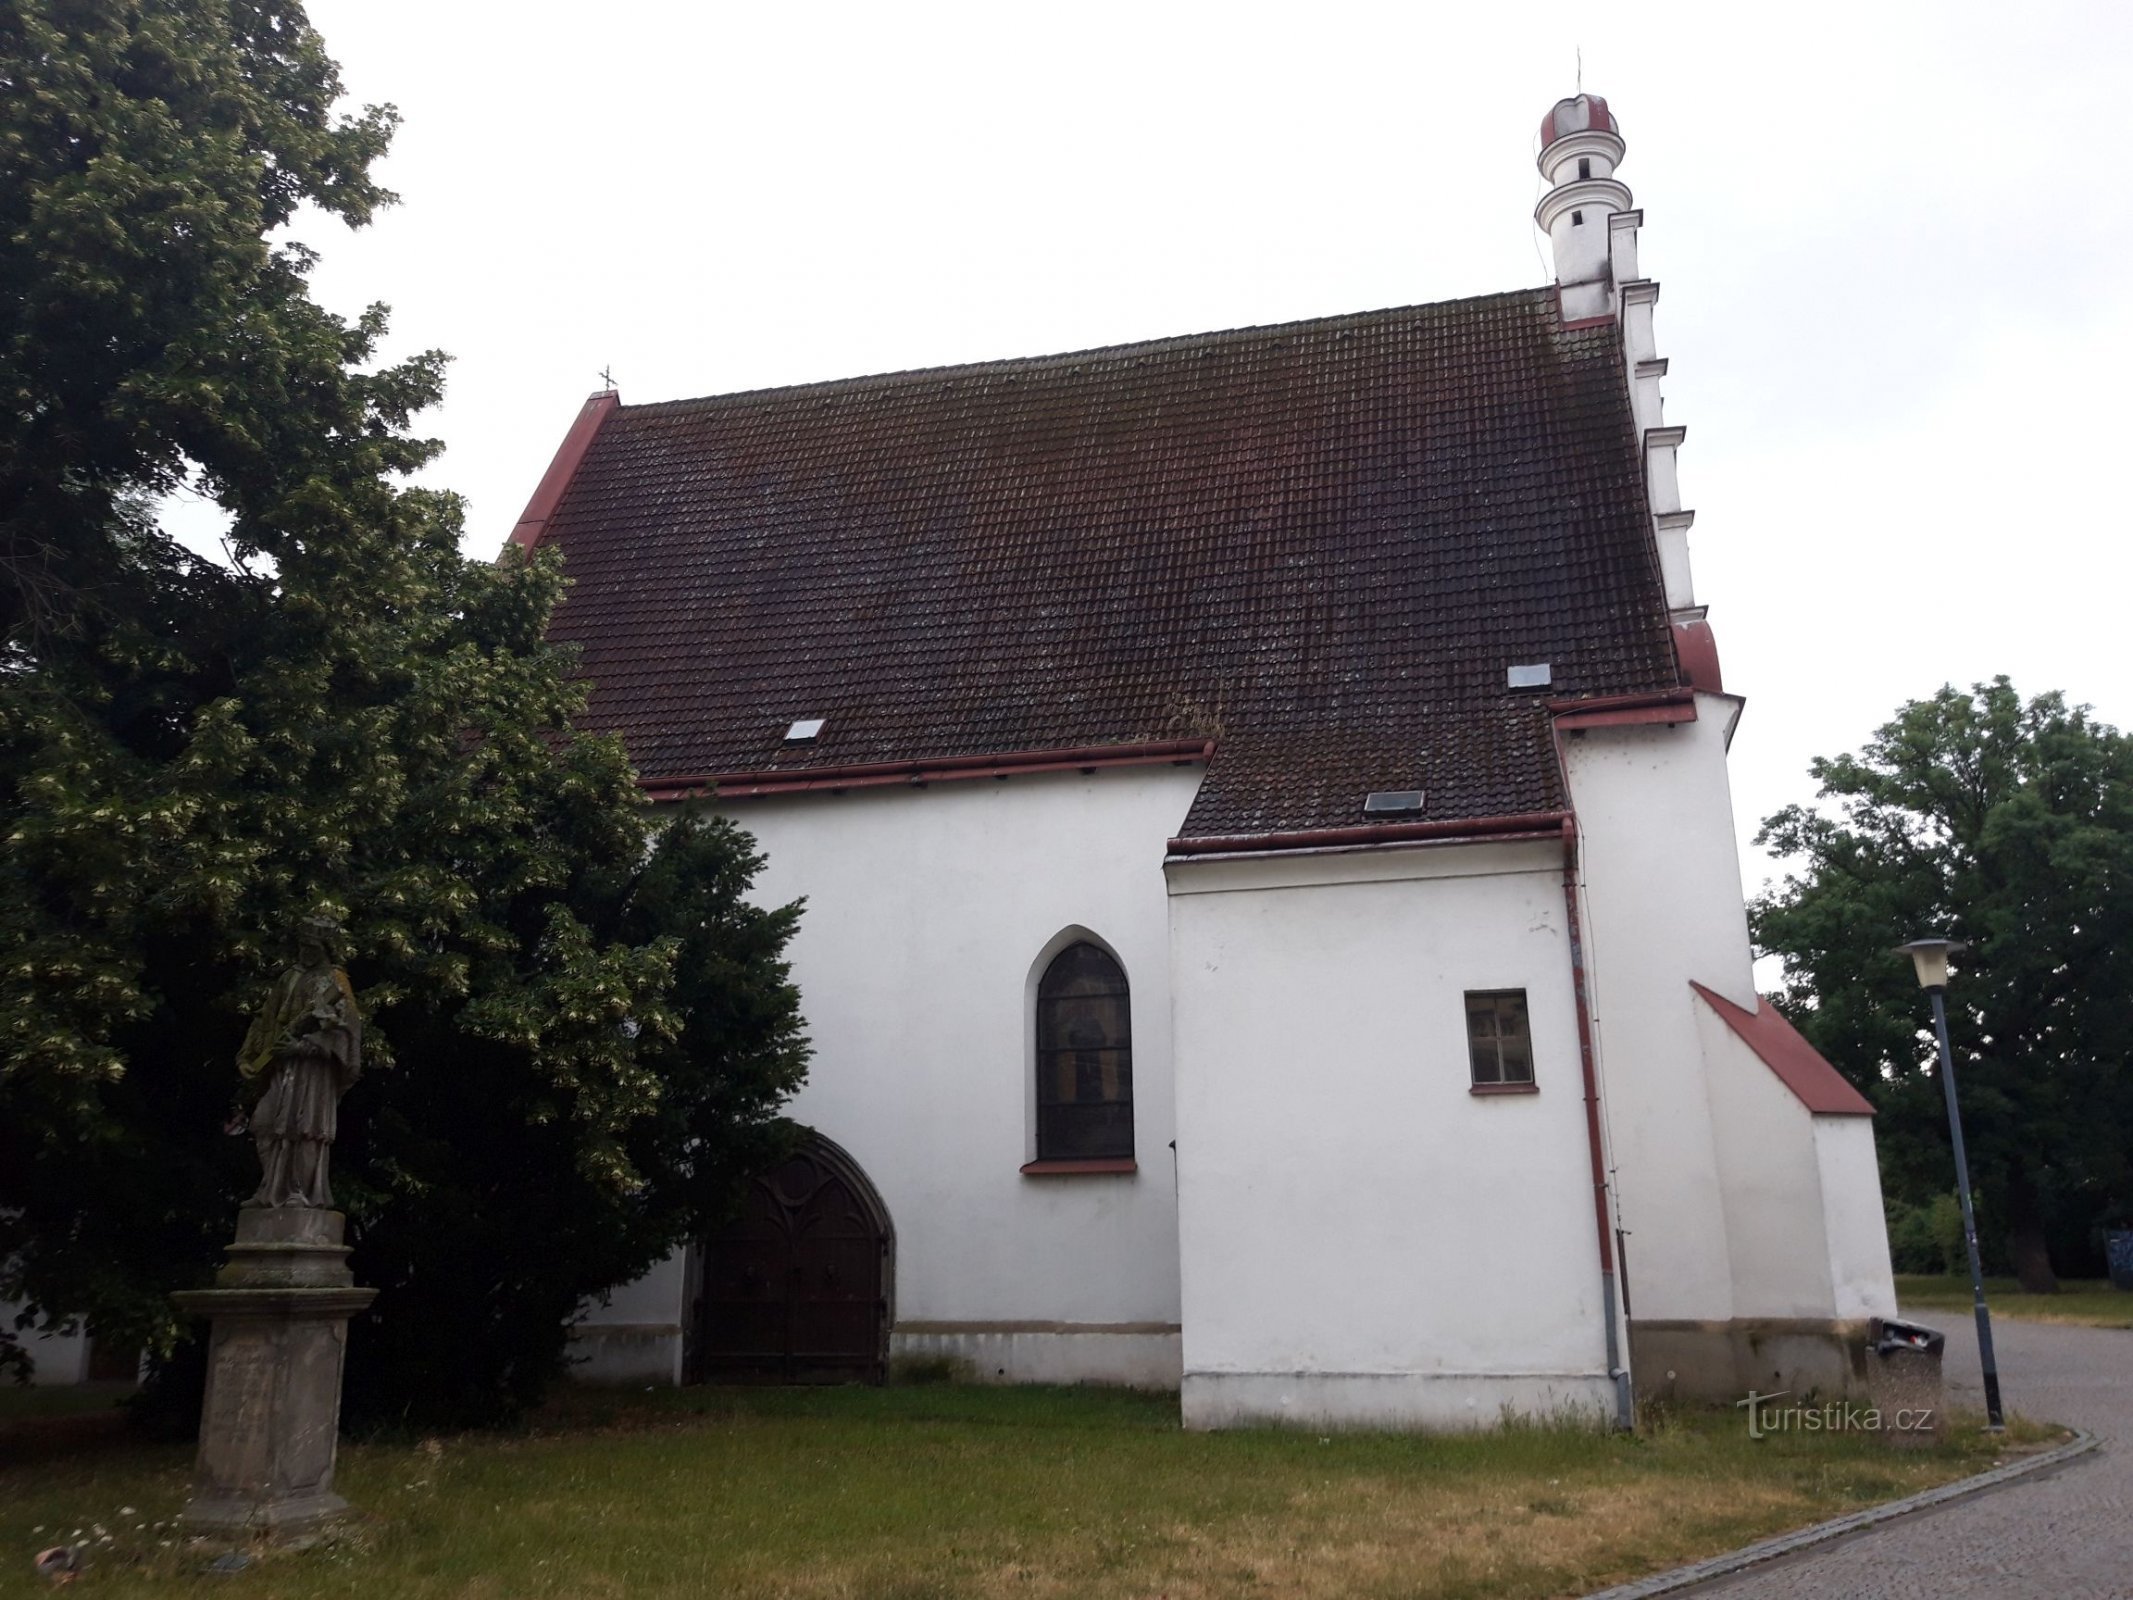 St. John of Nepomuck at the church of St. John the Baptist in Pardubice